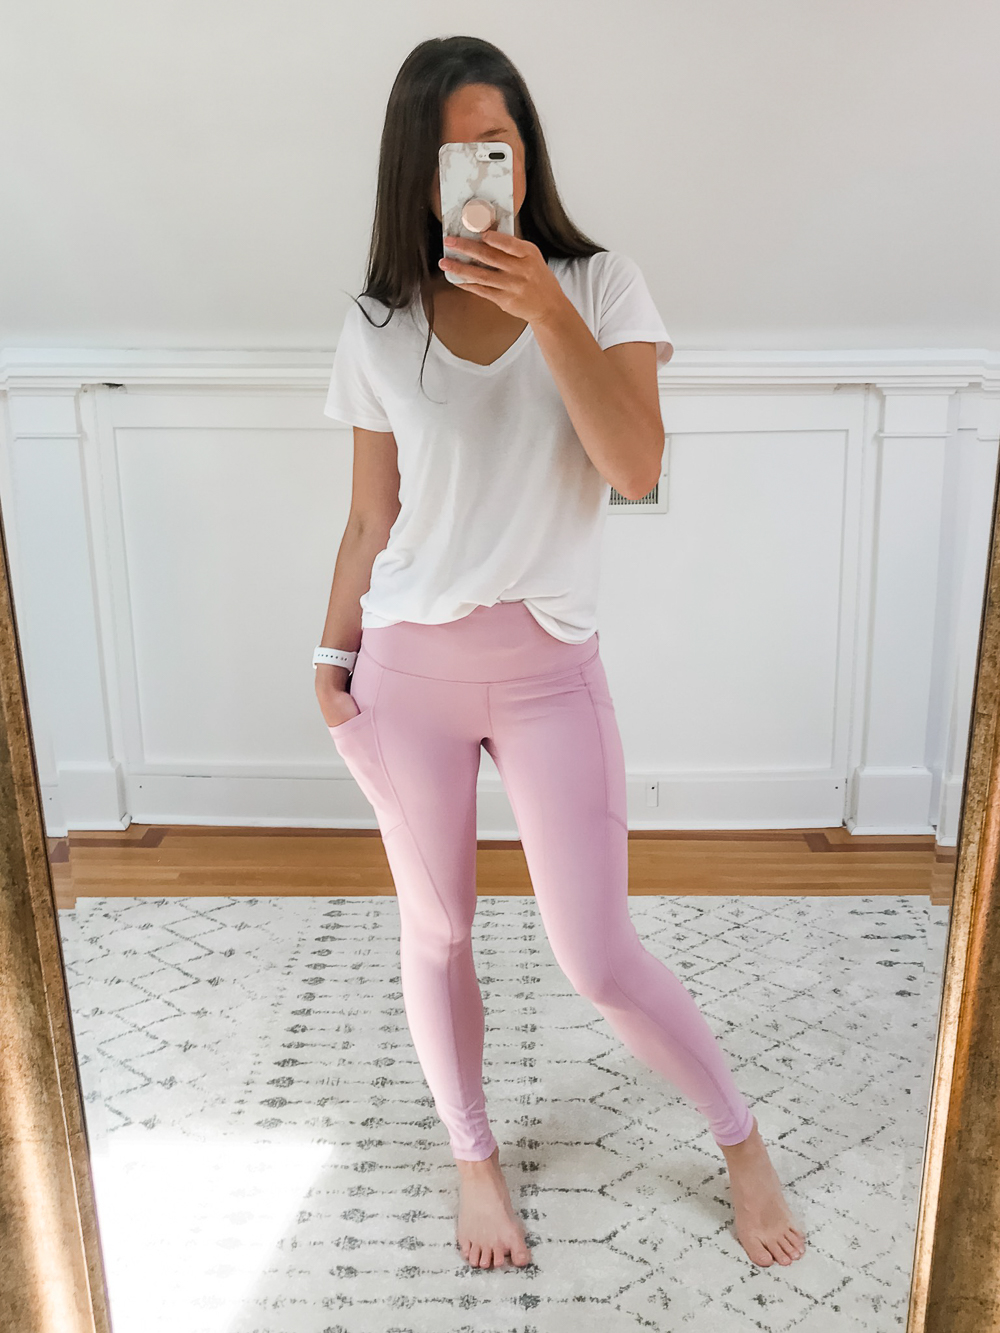 Amazon 90 Degree by Reflex High Waisted Leggings in Dawn Pink, 90 Degree by Reflex High Waisted Yoga Pants, Amazon Prime Day Try-On Haul: Top Affordable Fashion Finds